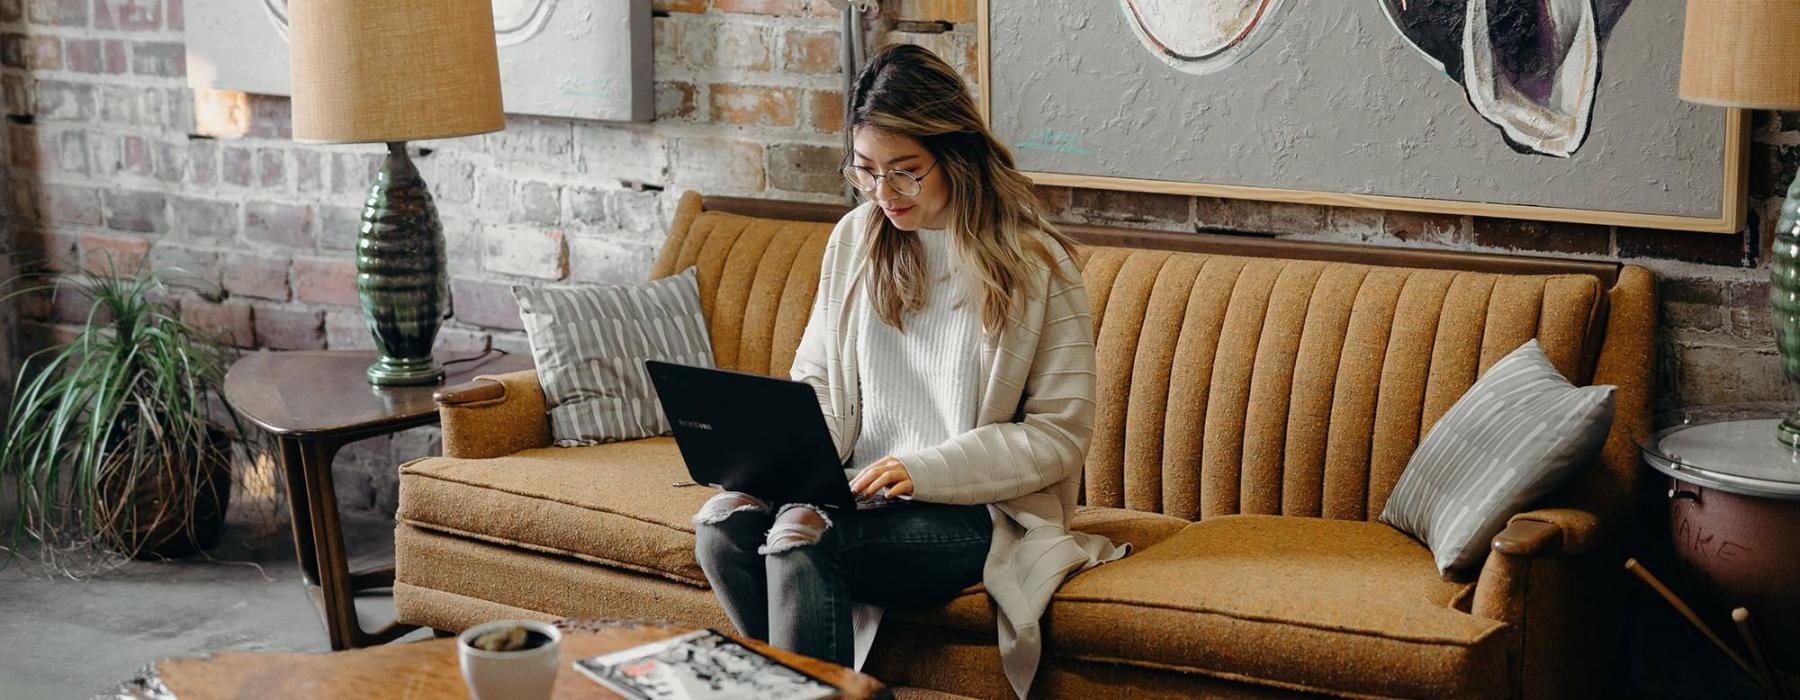 a woman sitting on a couch working on a laptop